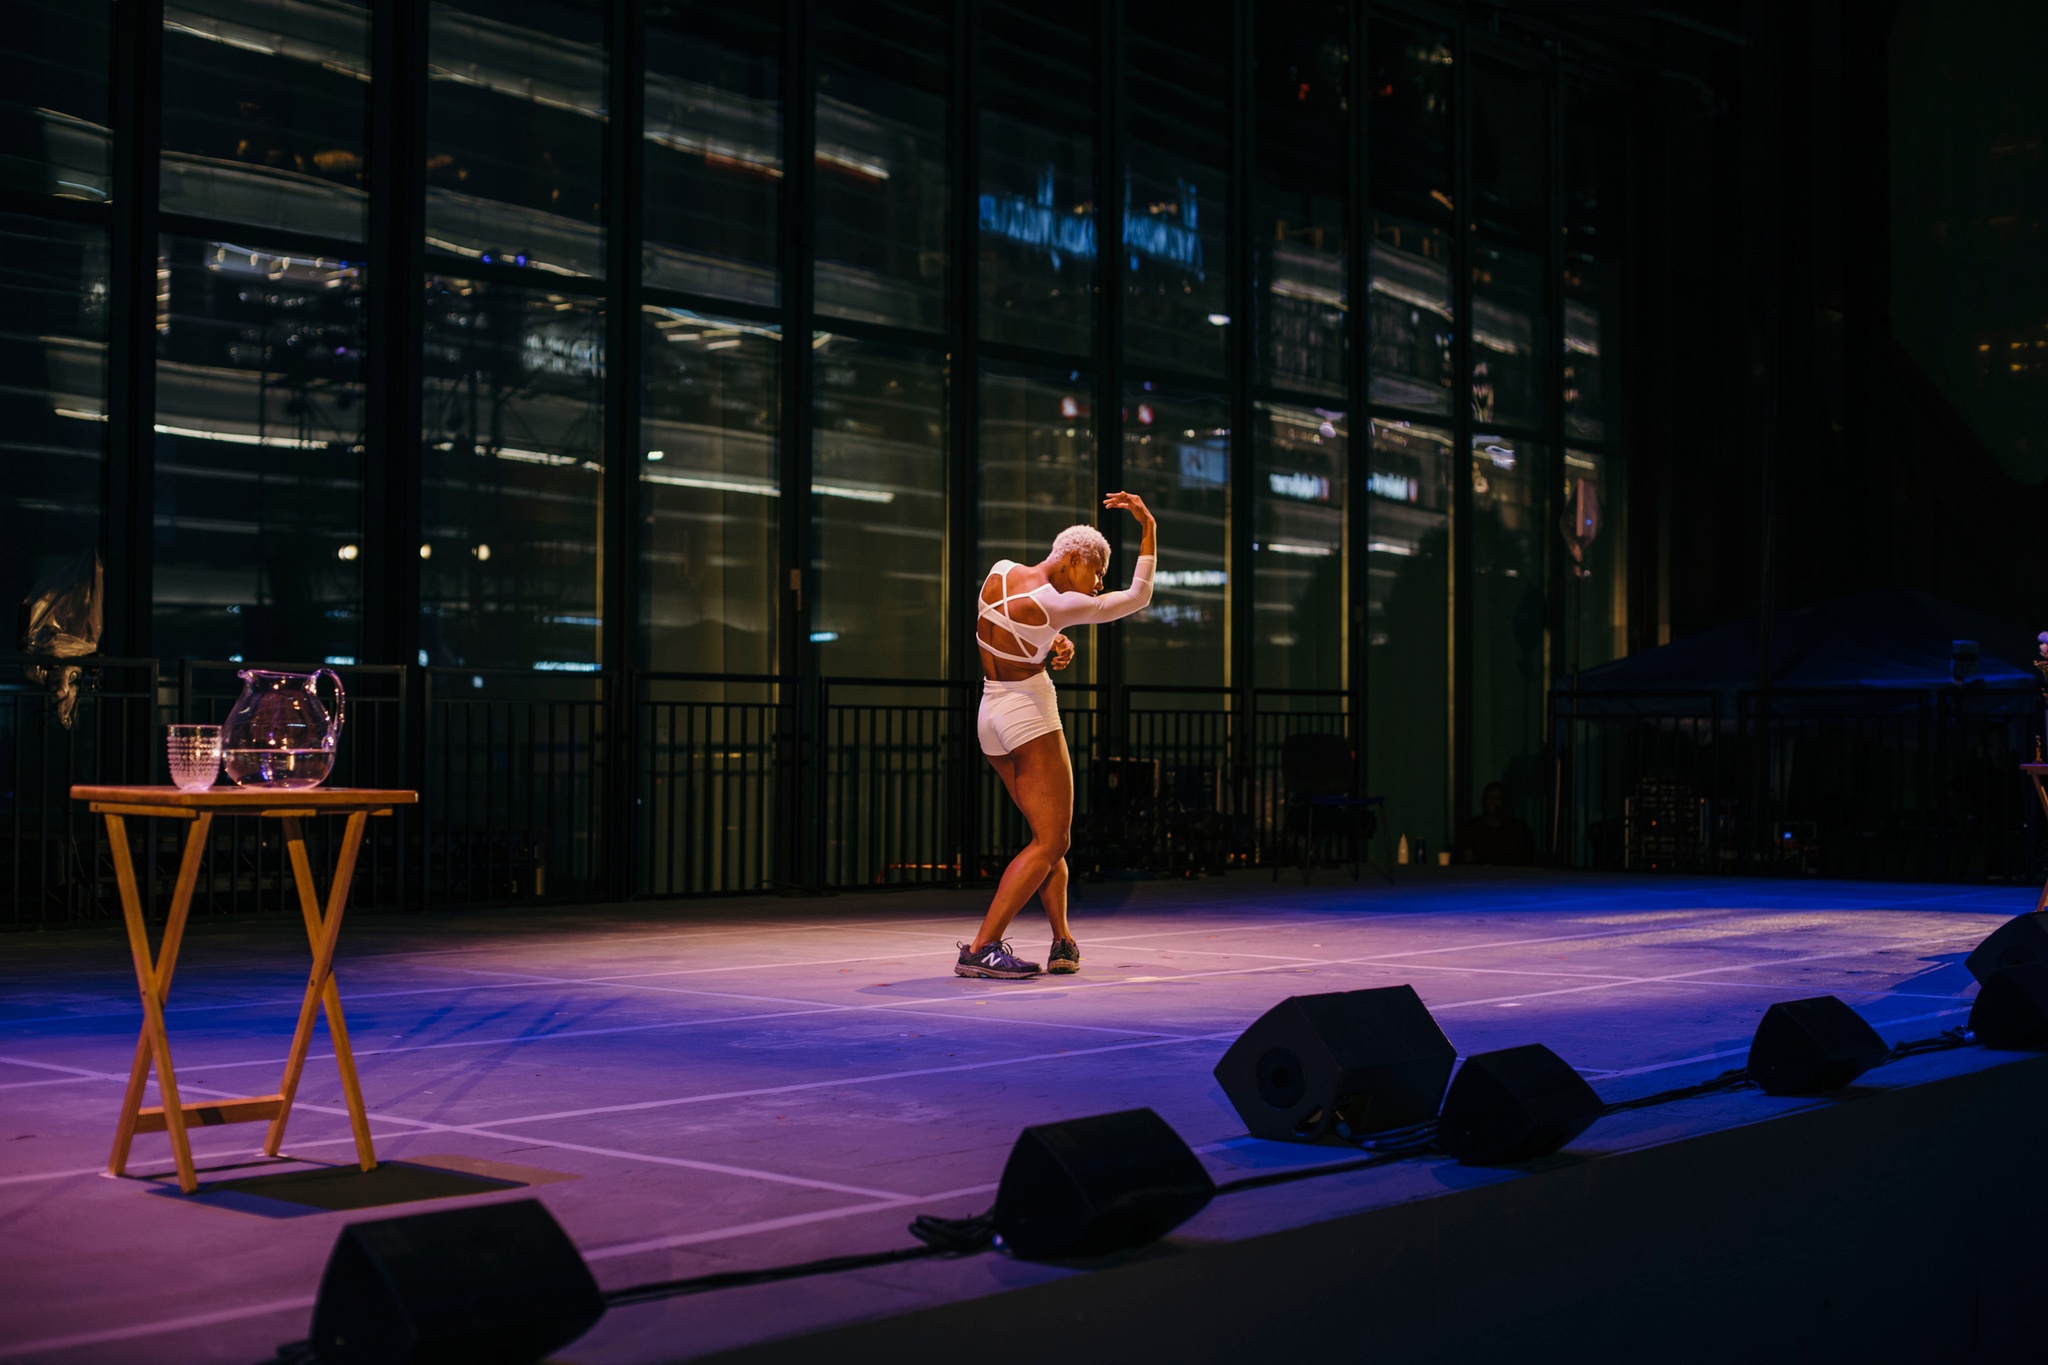 Woman dancing on a stage at night.